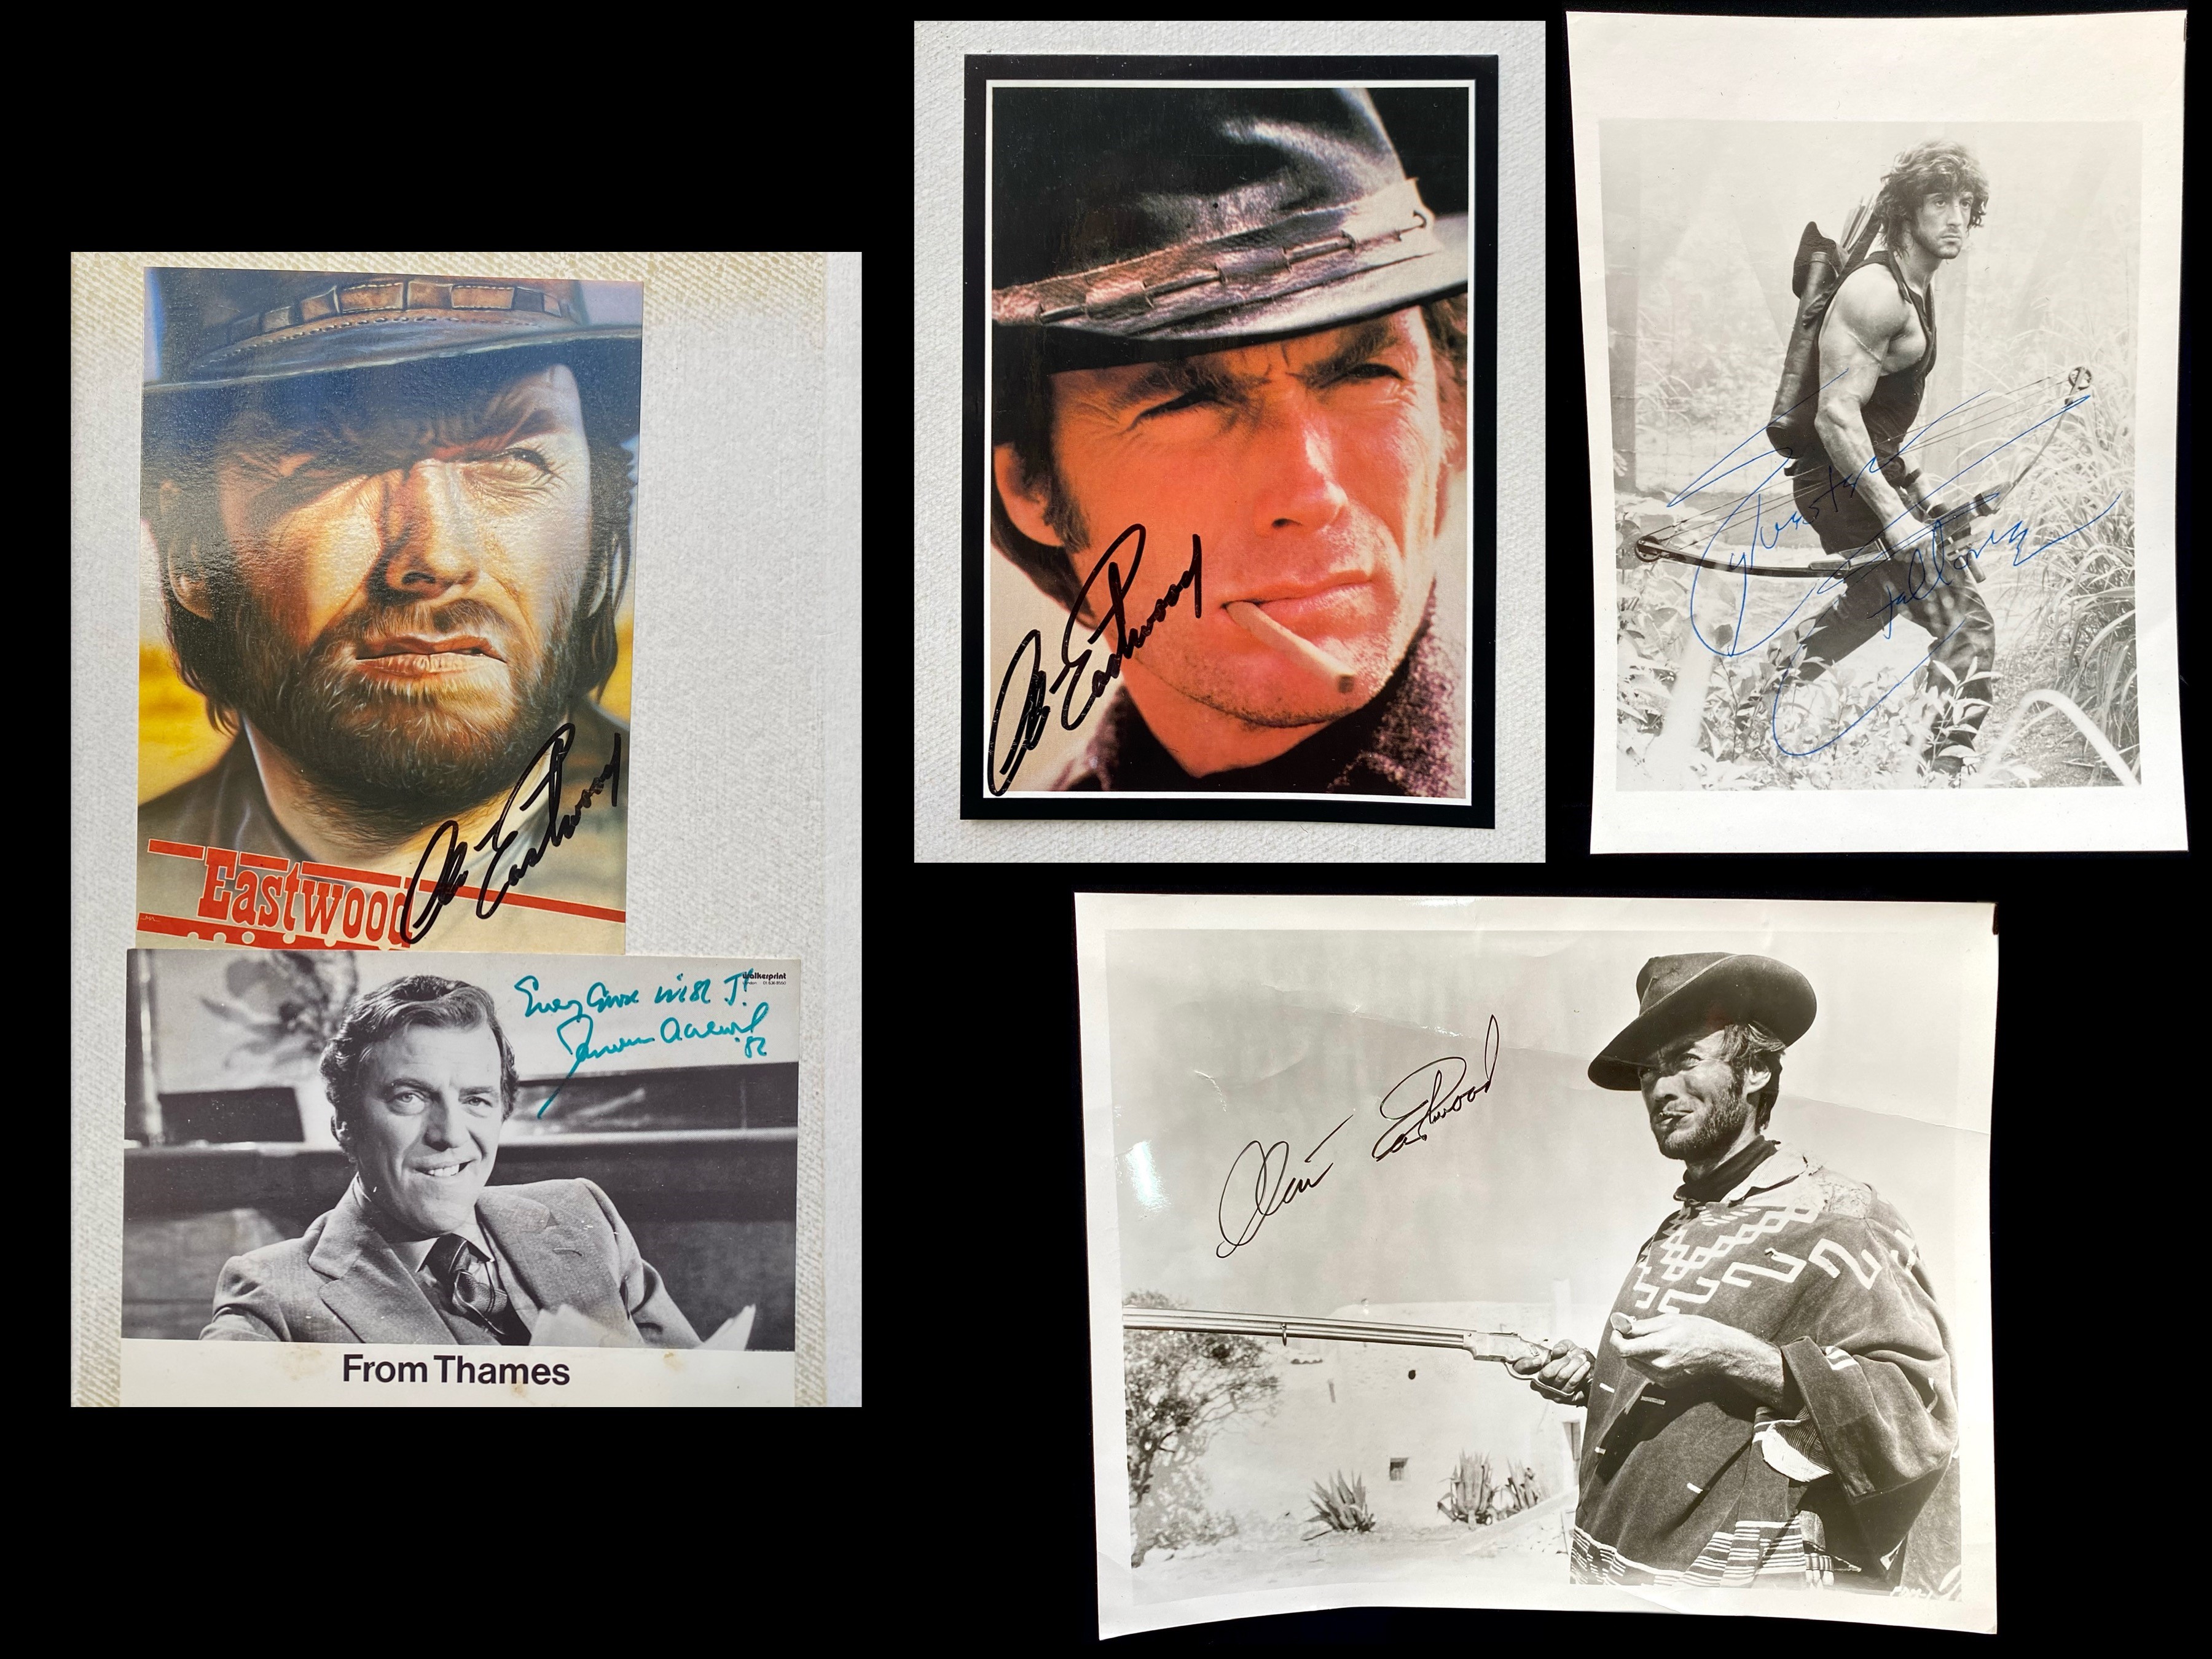 Clint Eastwood Interest - Photographs of Clint Eastwood as Dirty Harry, photographs signed.